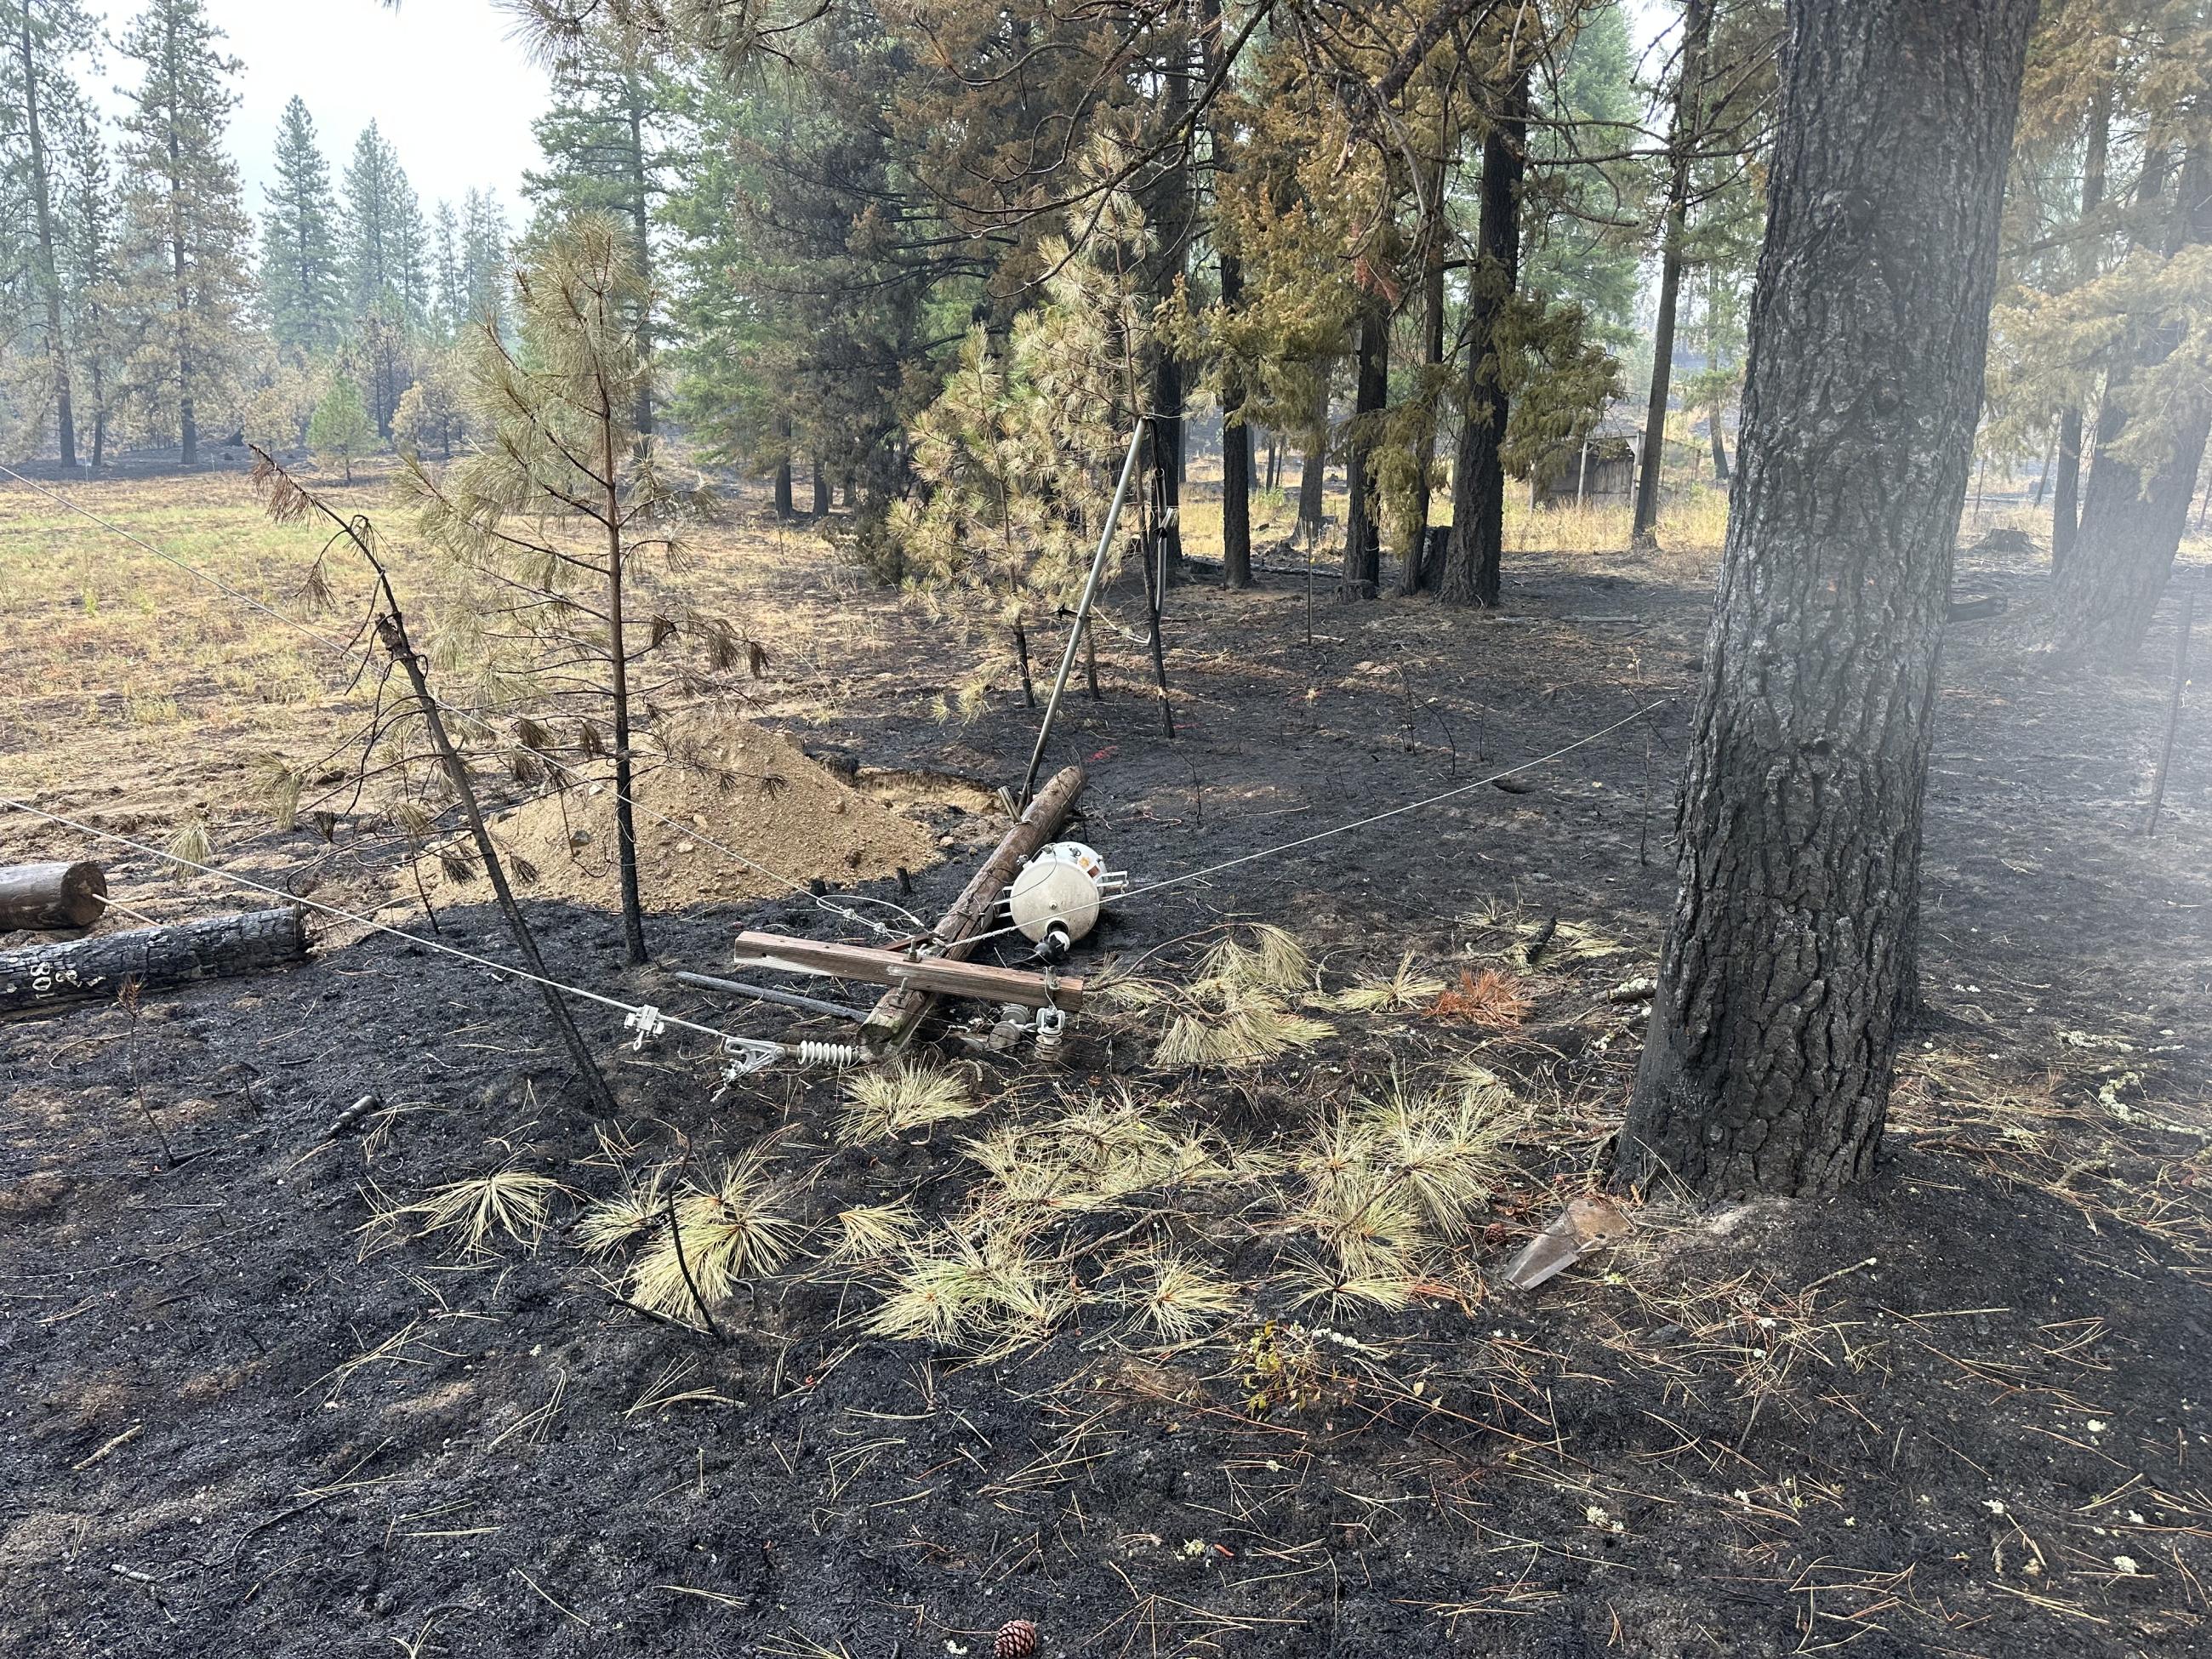 Burned areas with downed powerline